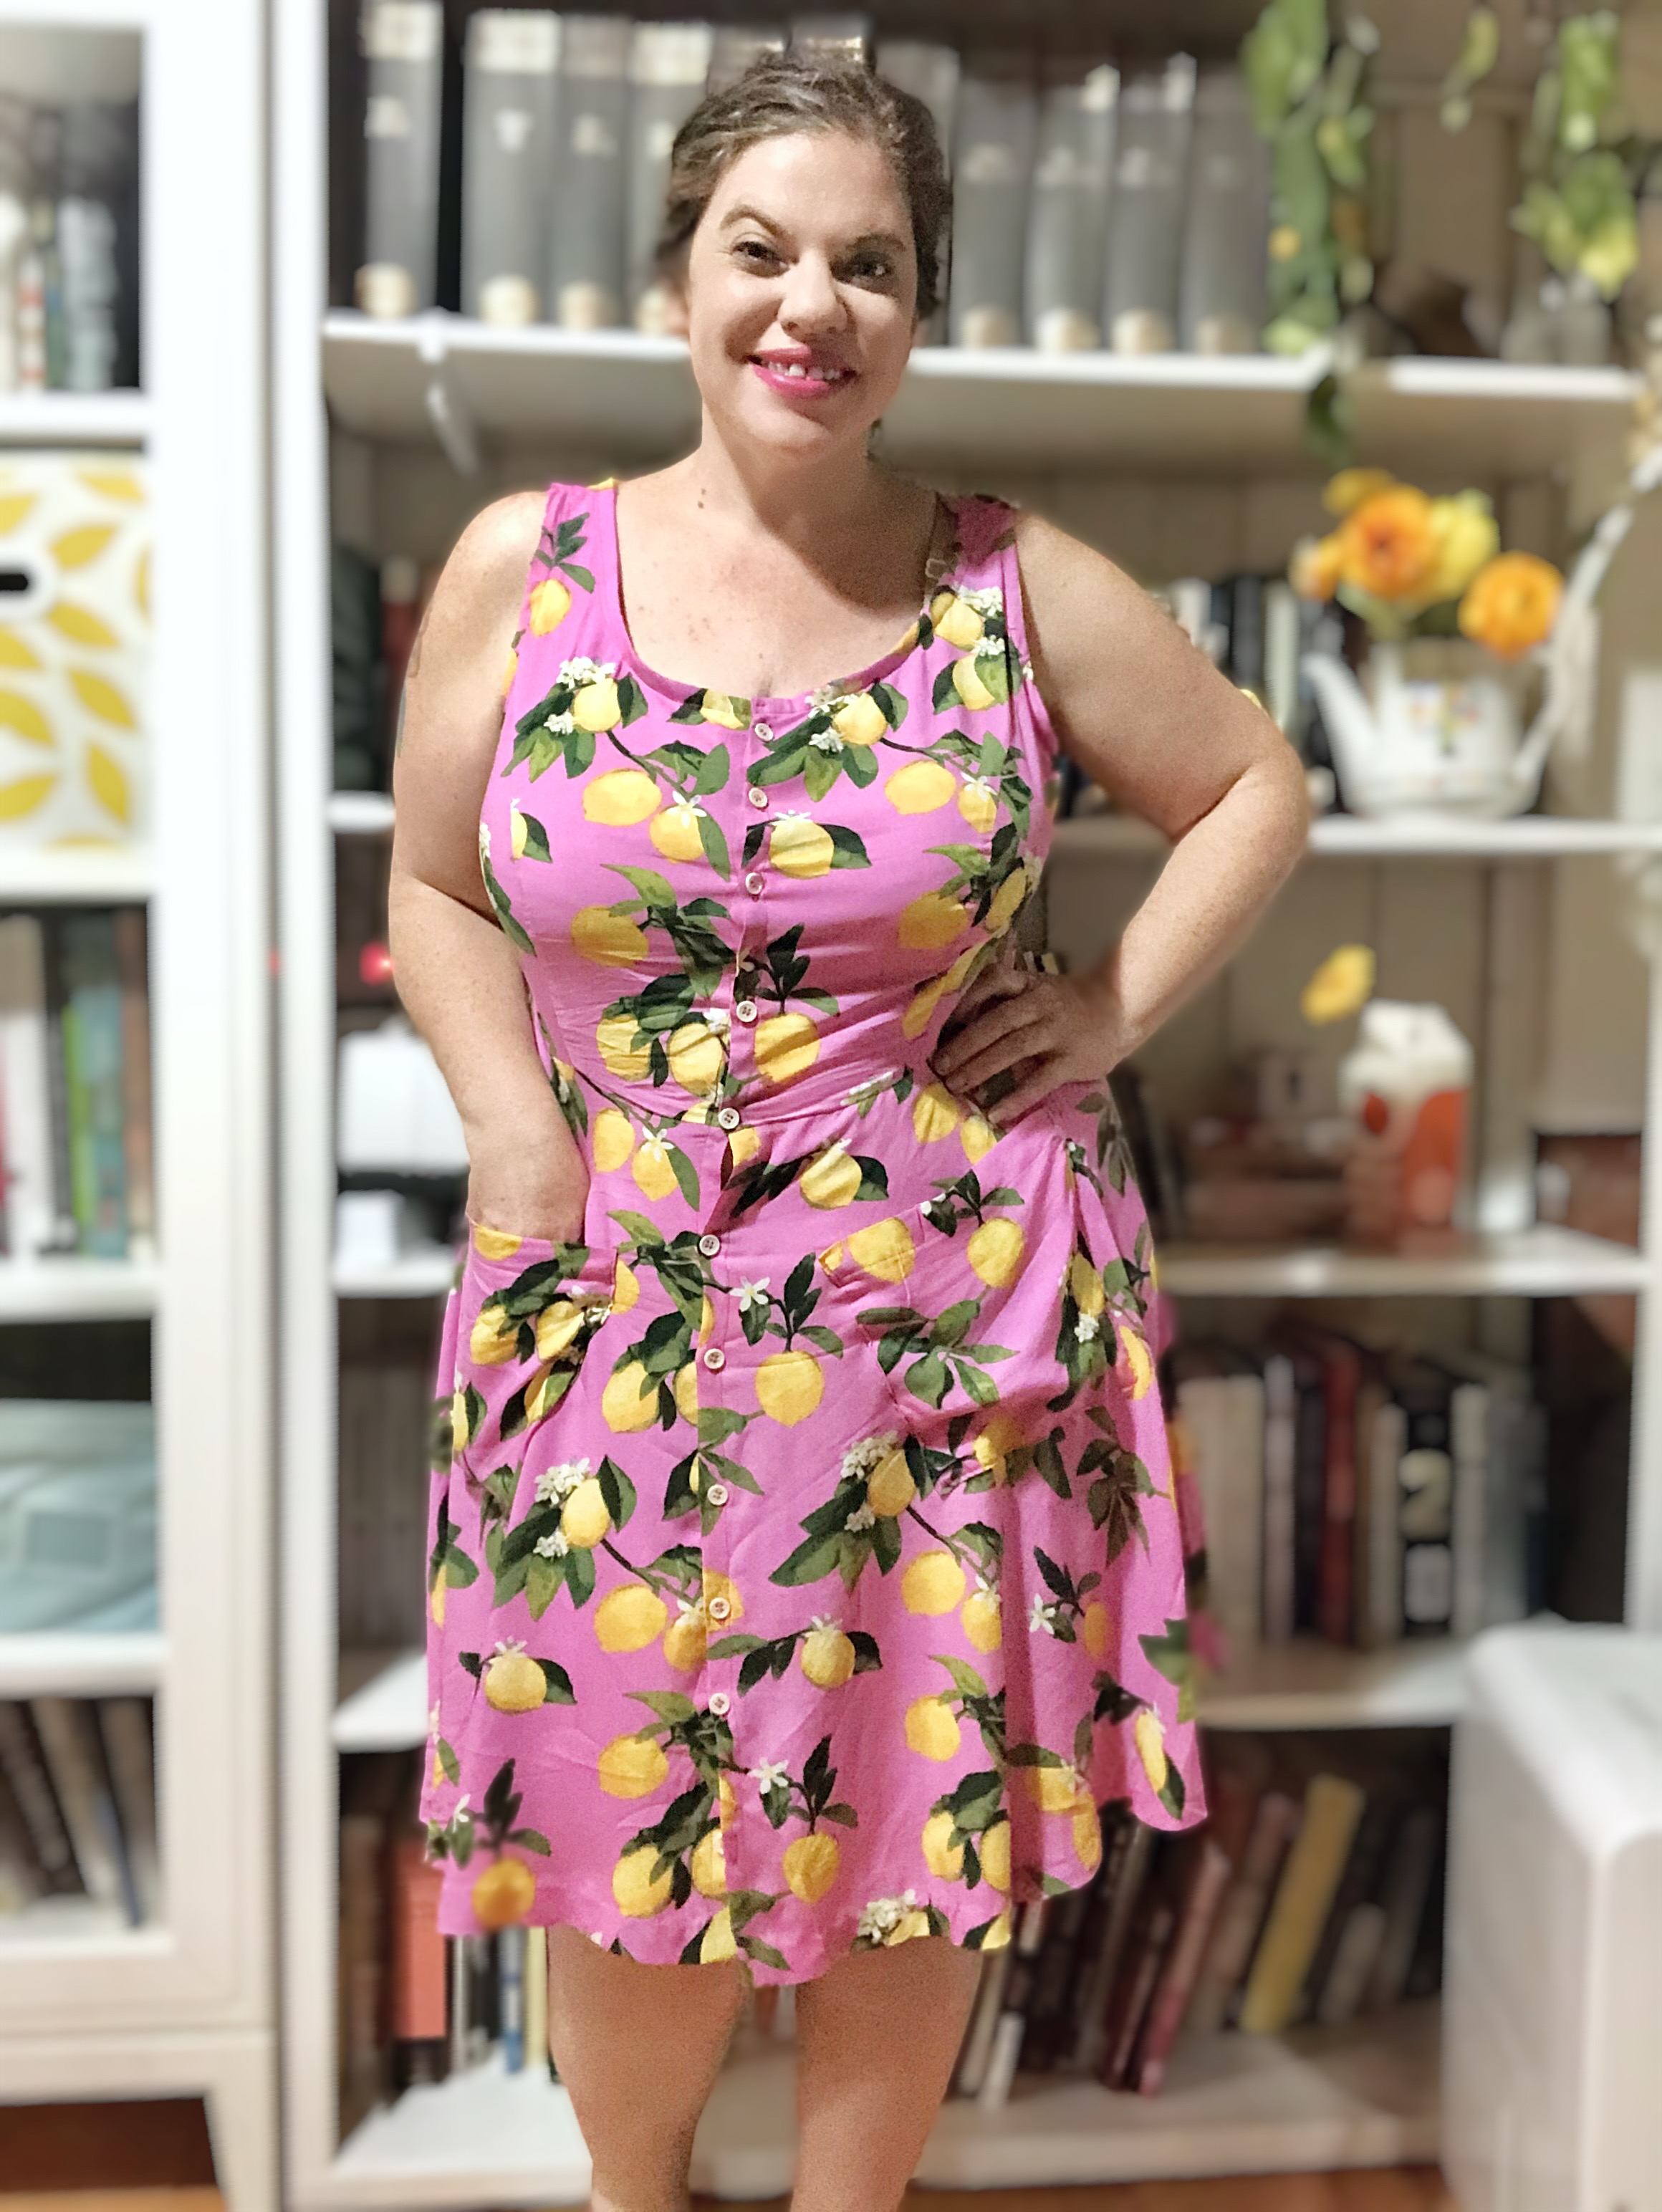 White woman with dark hair stands in front of a colorful bookshelf wearing a pink sundress decorated with yellow lemons.